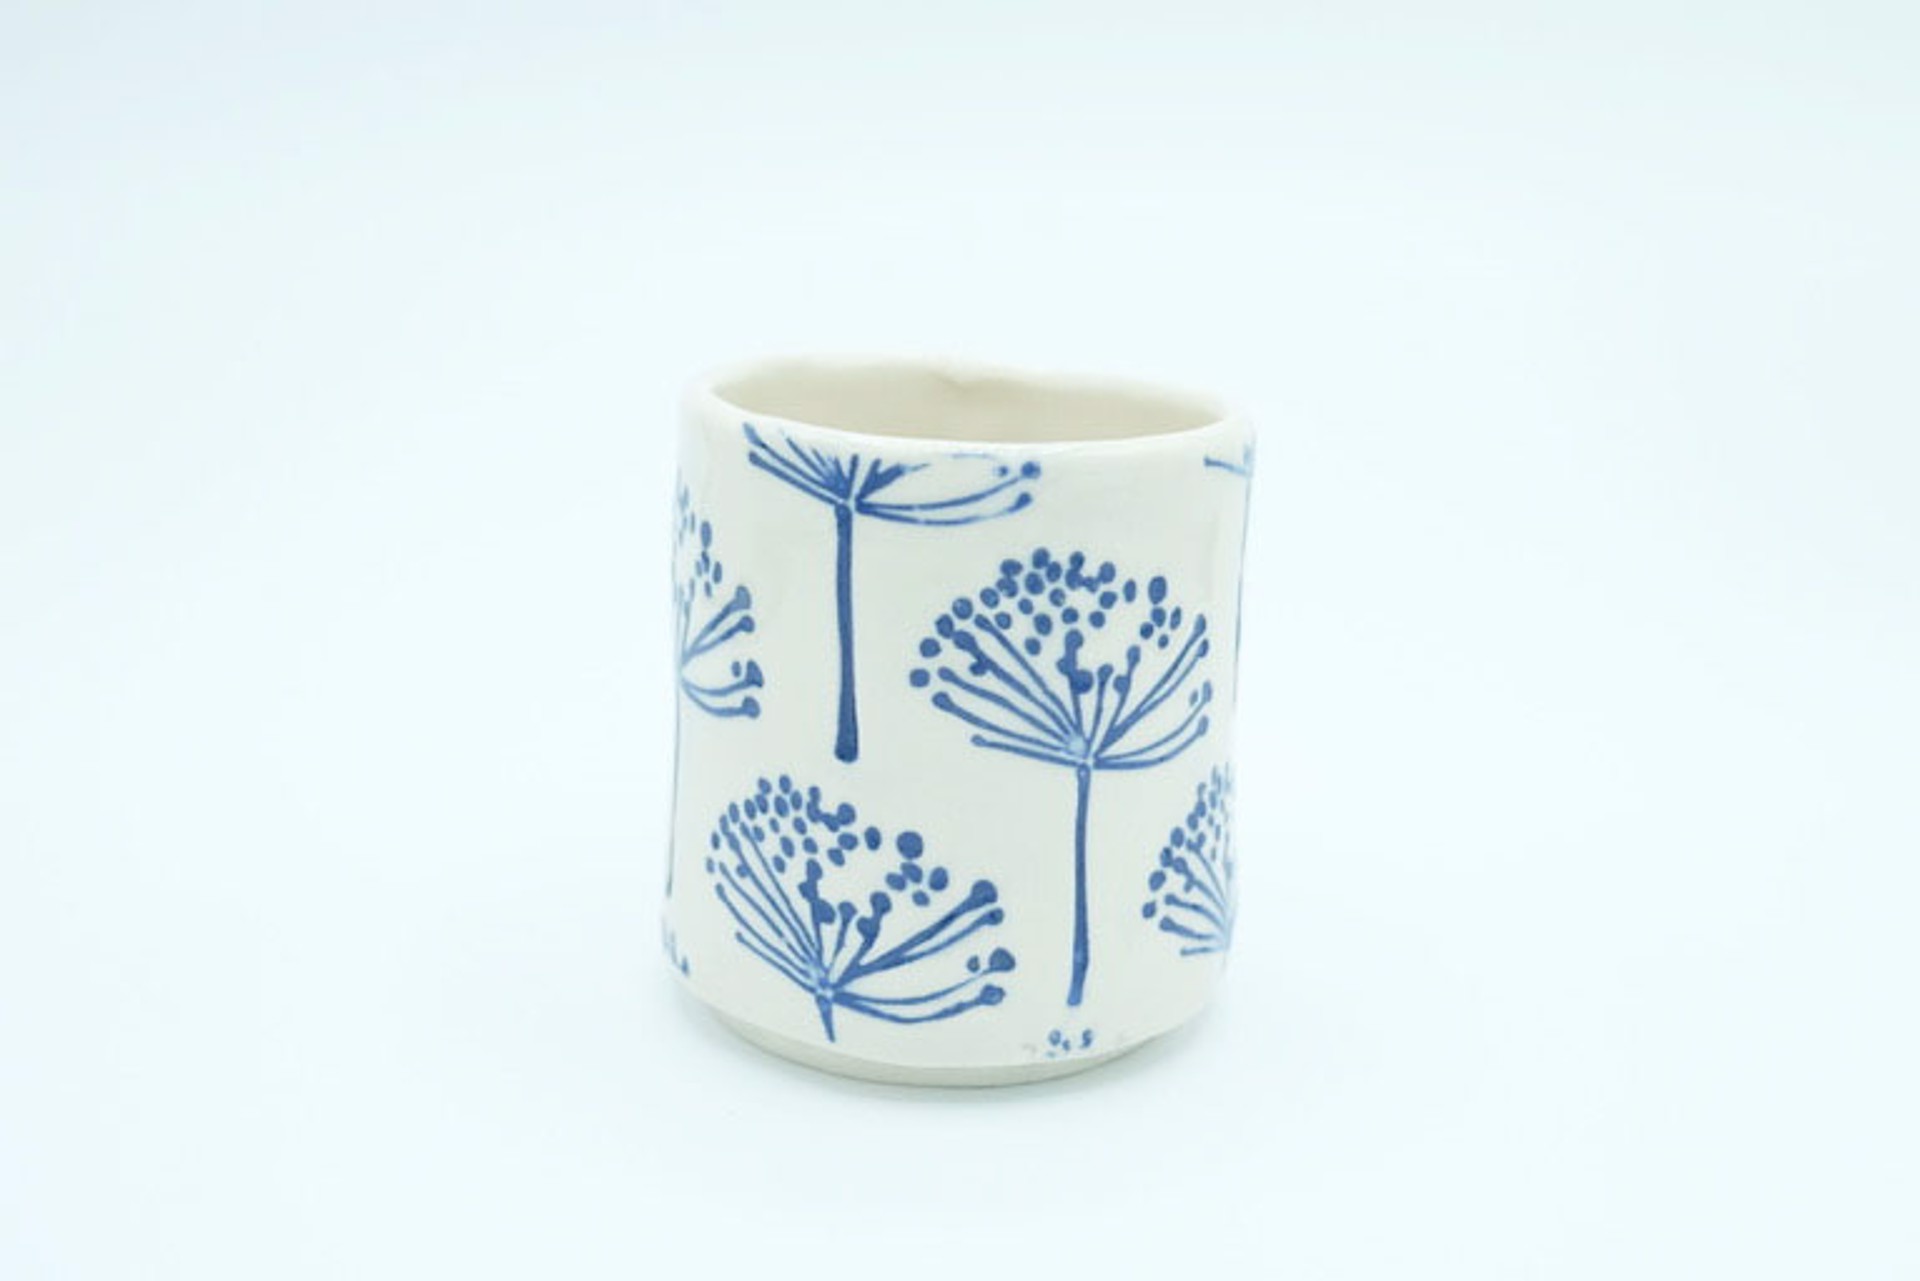 Flowering Carrot Cup by Laura Cooke